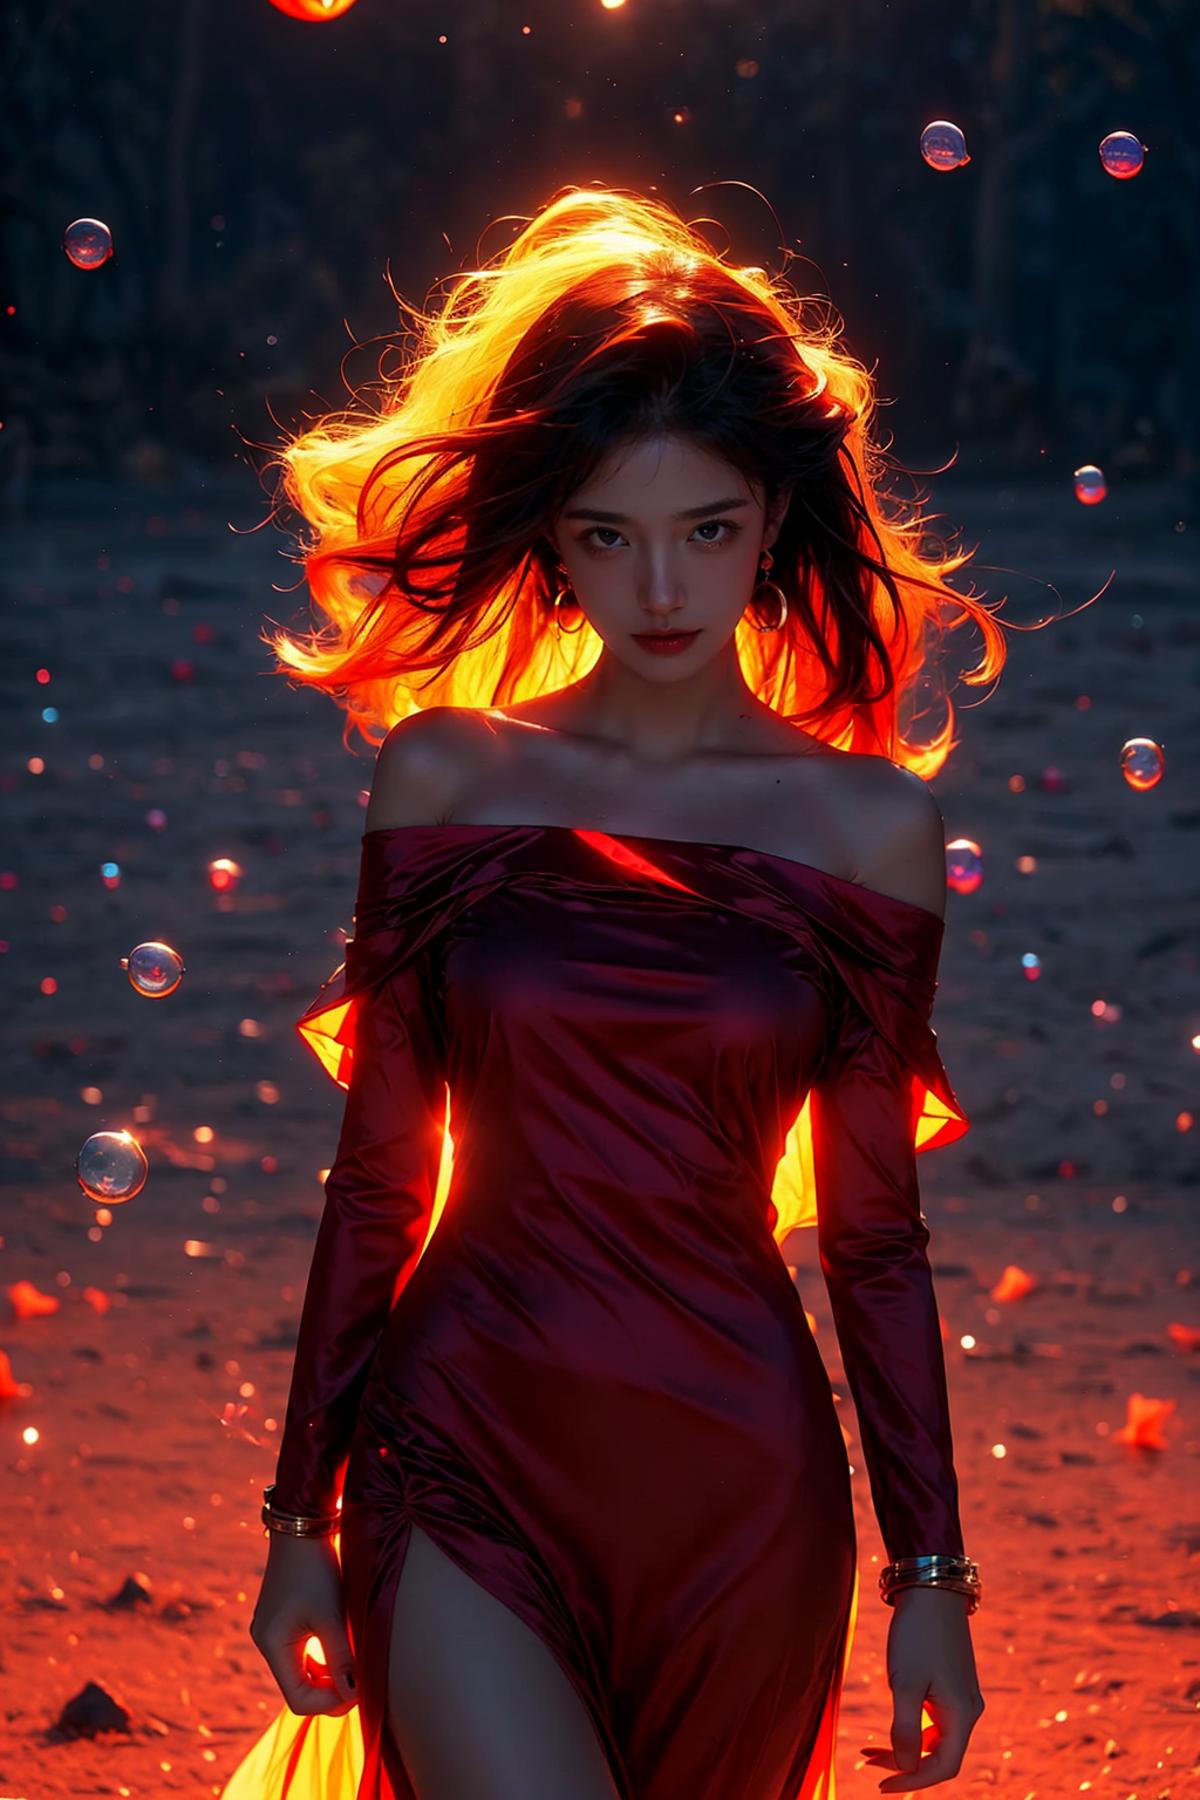 A woman in a red dress with her hair blowing in the wind.